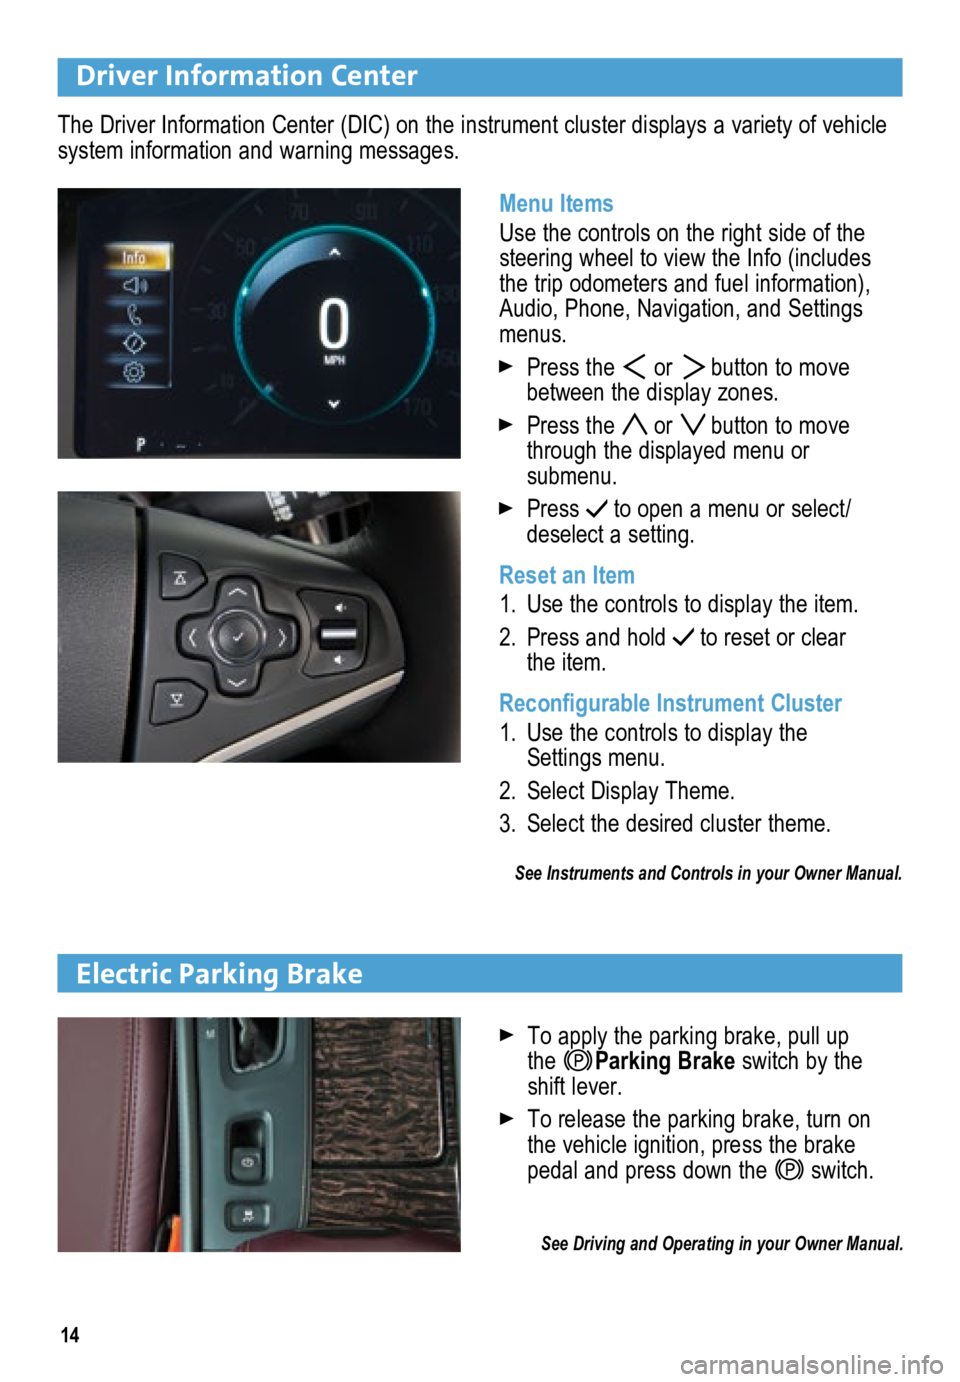 BUICK LACROSSE 2015  Get To Know Guide 14
Driver Information Center
Menu Items
Use the controls on the right side of the 
steering wheel to view the Info (includes 
the trip odometers and fuel information), 
Audio, Phone, Navigation, and S